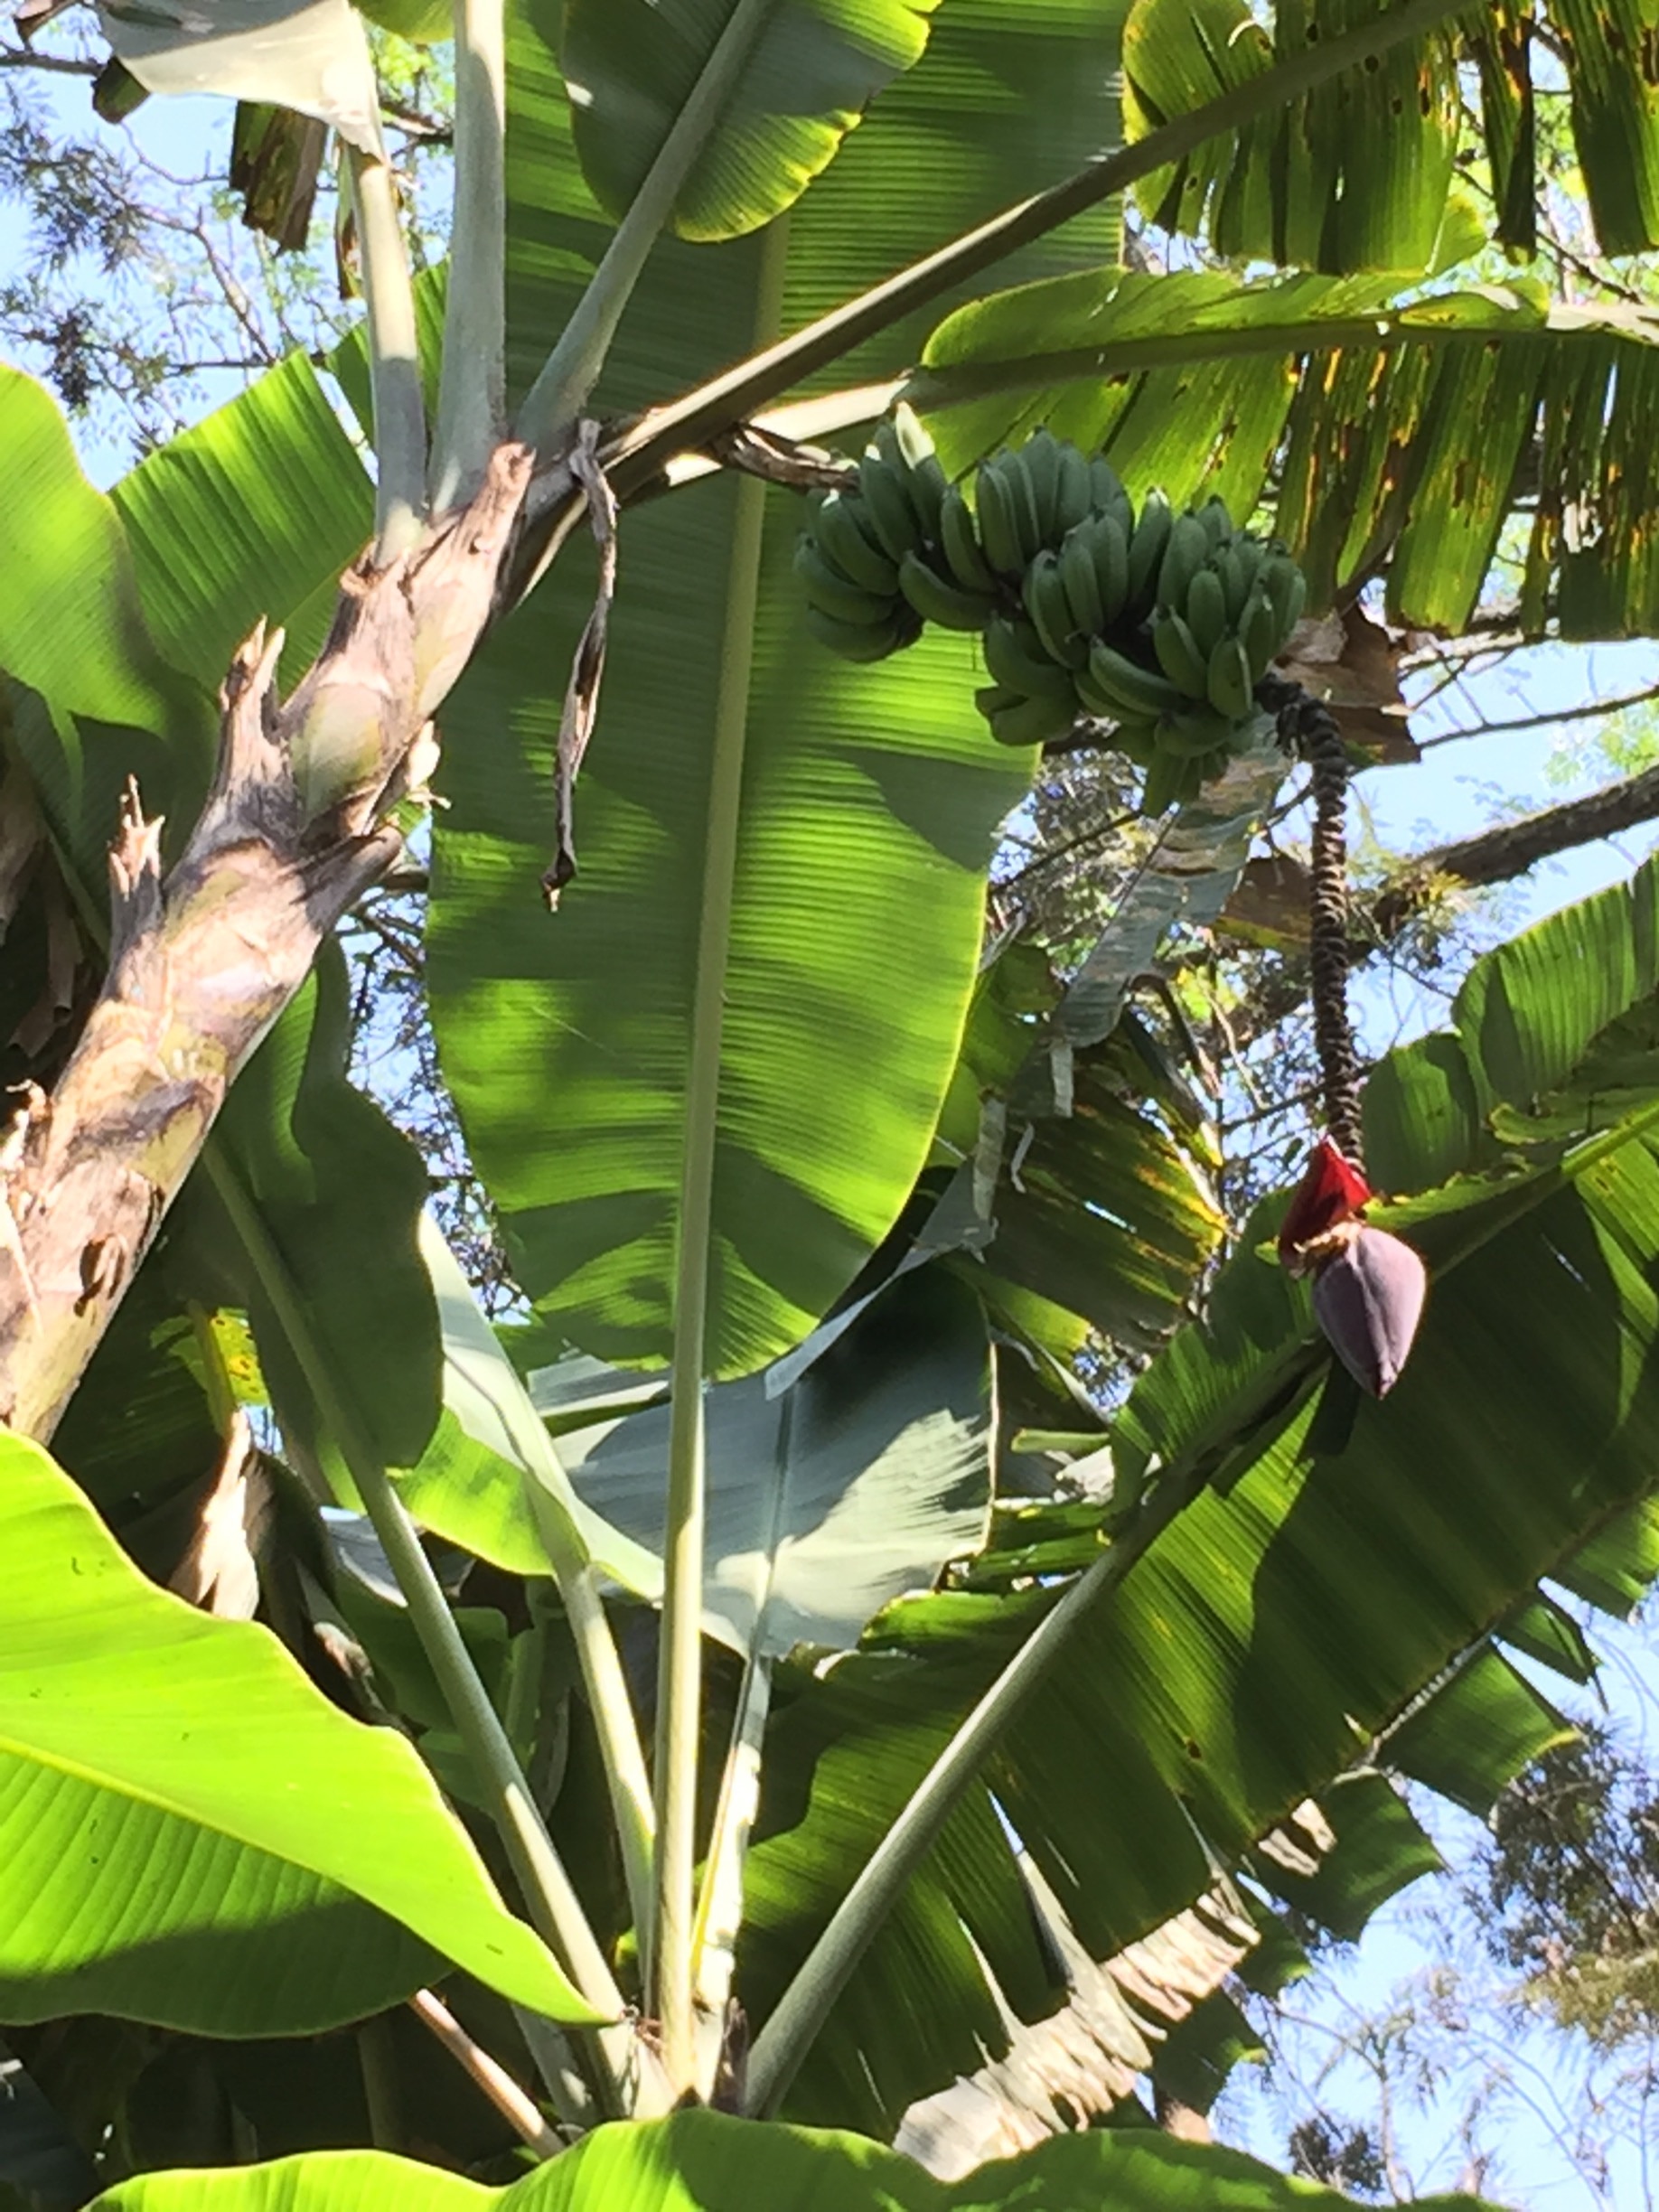 Fruit trees around te park: bananas and berriee. Flowers and small wild animals join them. People walk around, be prepared to shake the park with jogging persons and pic-nic families.